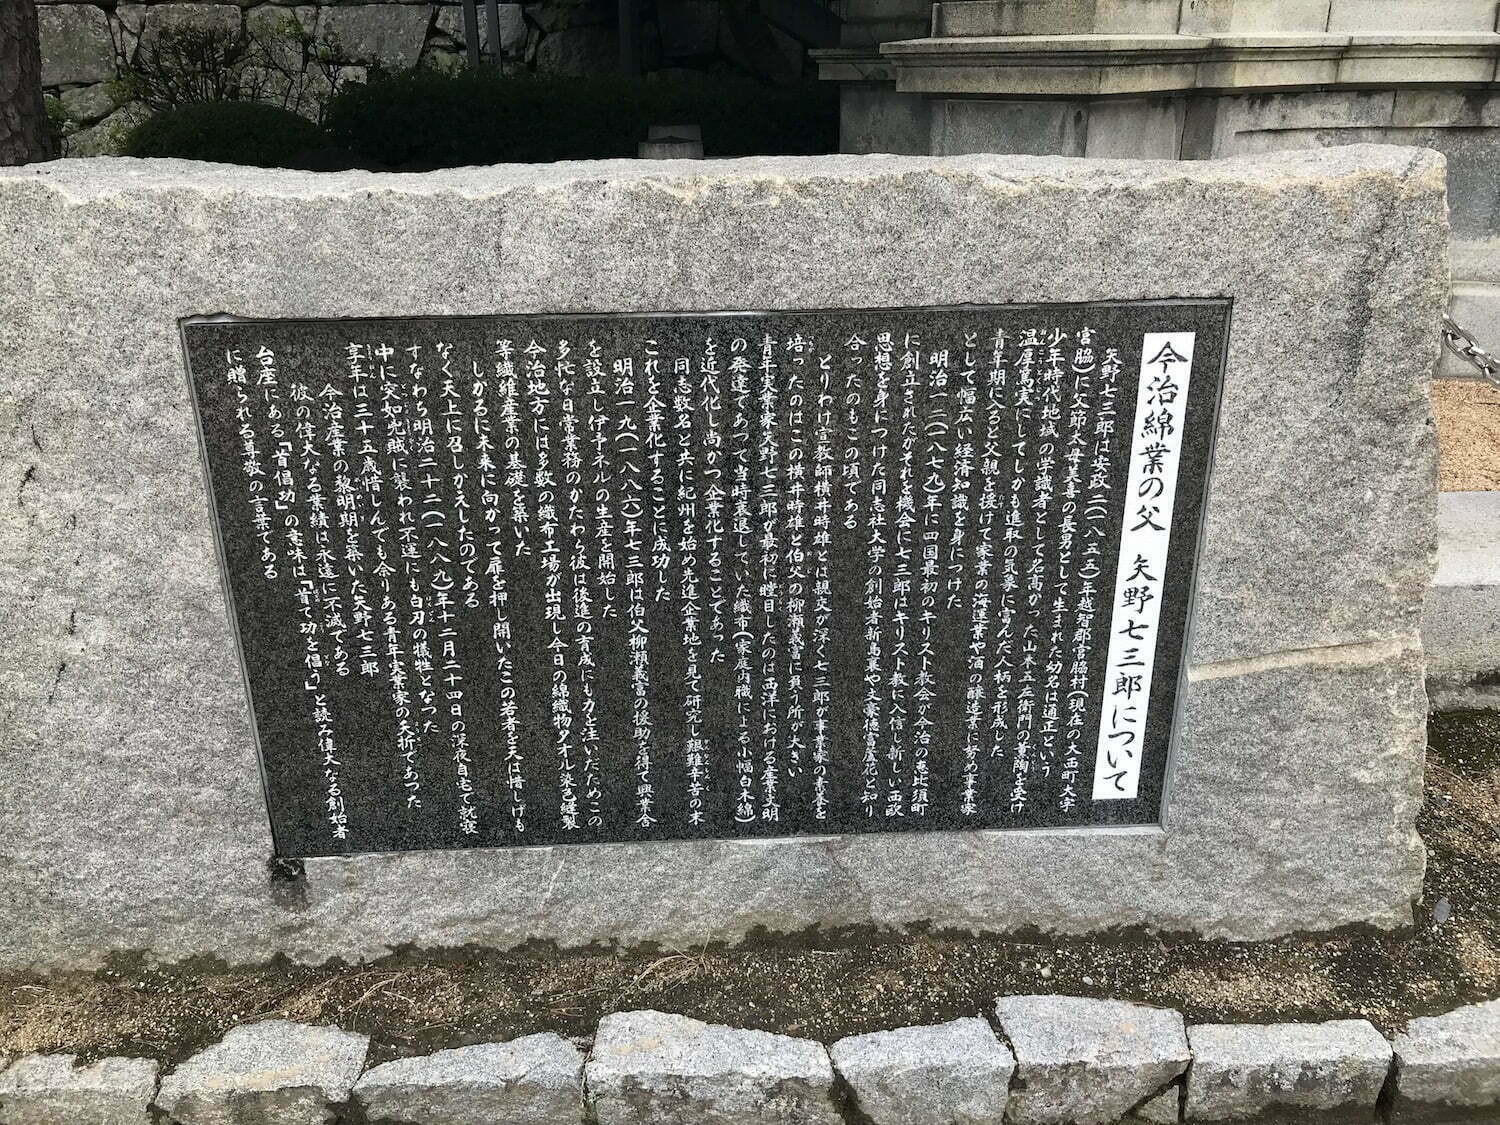 Father of modern industry in Imabari